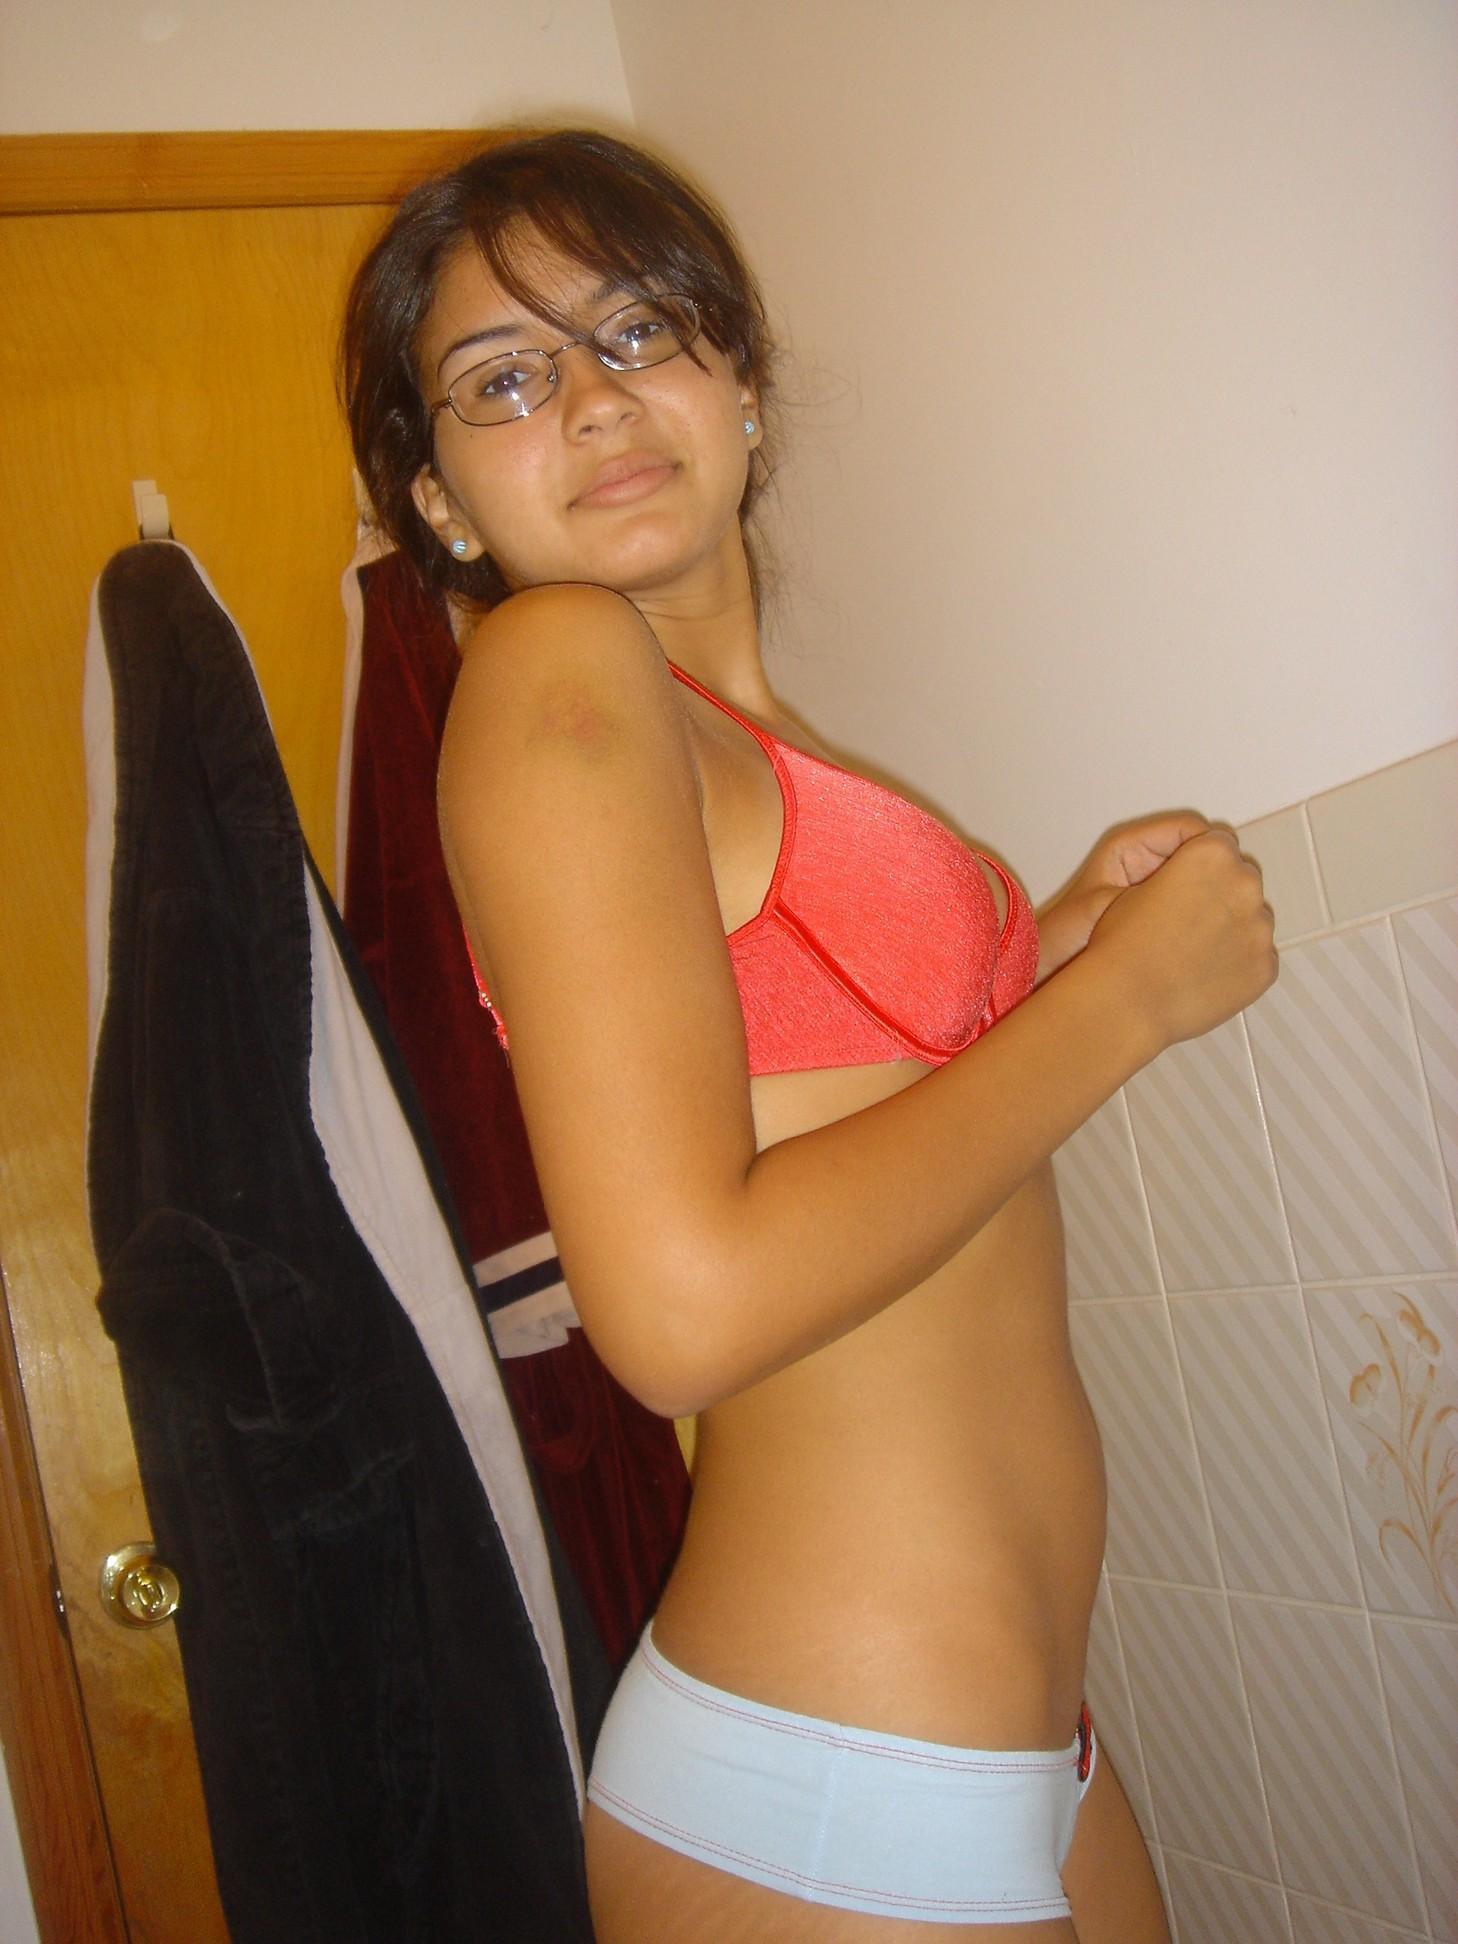 amateur adult latina sex gallery pic picture